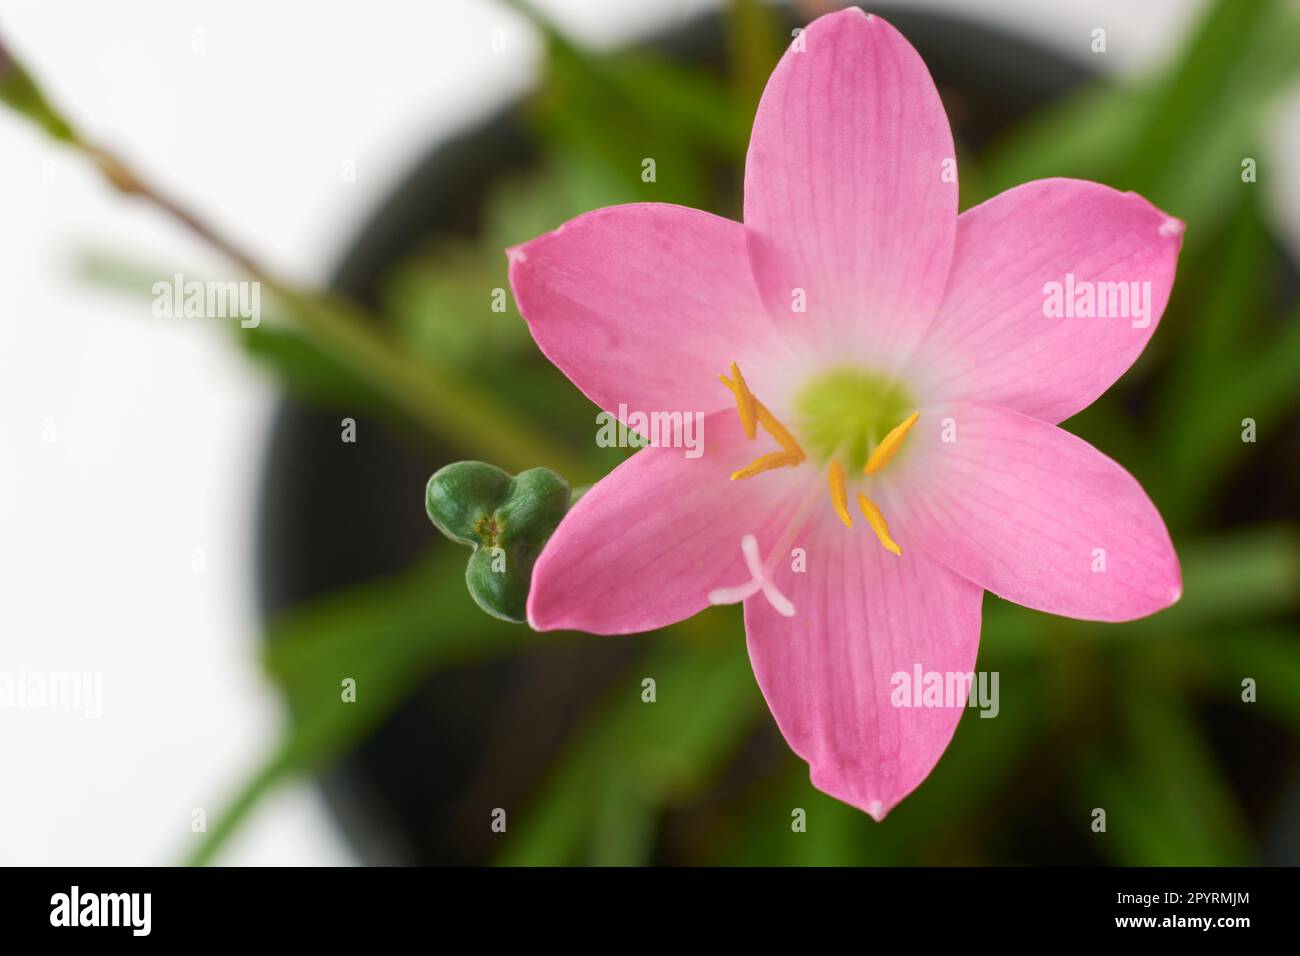 rain lily or zephyrlily, aka cuban zephyr or rose fairy lily which bloom only after heavy rain, small tropical and ornamental pink flower taken straig Stock Photo